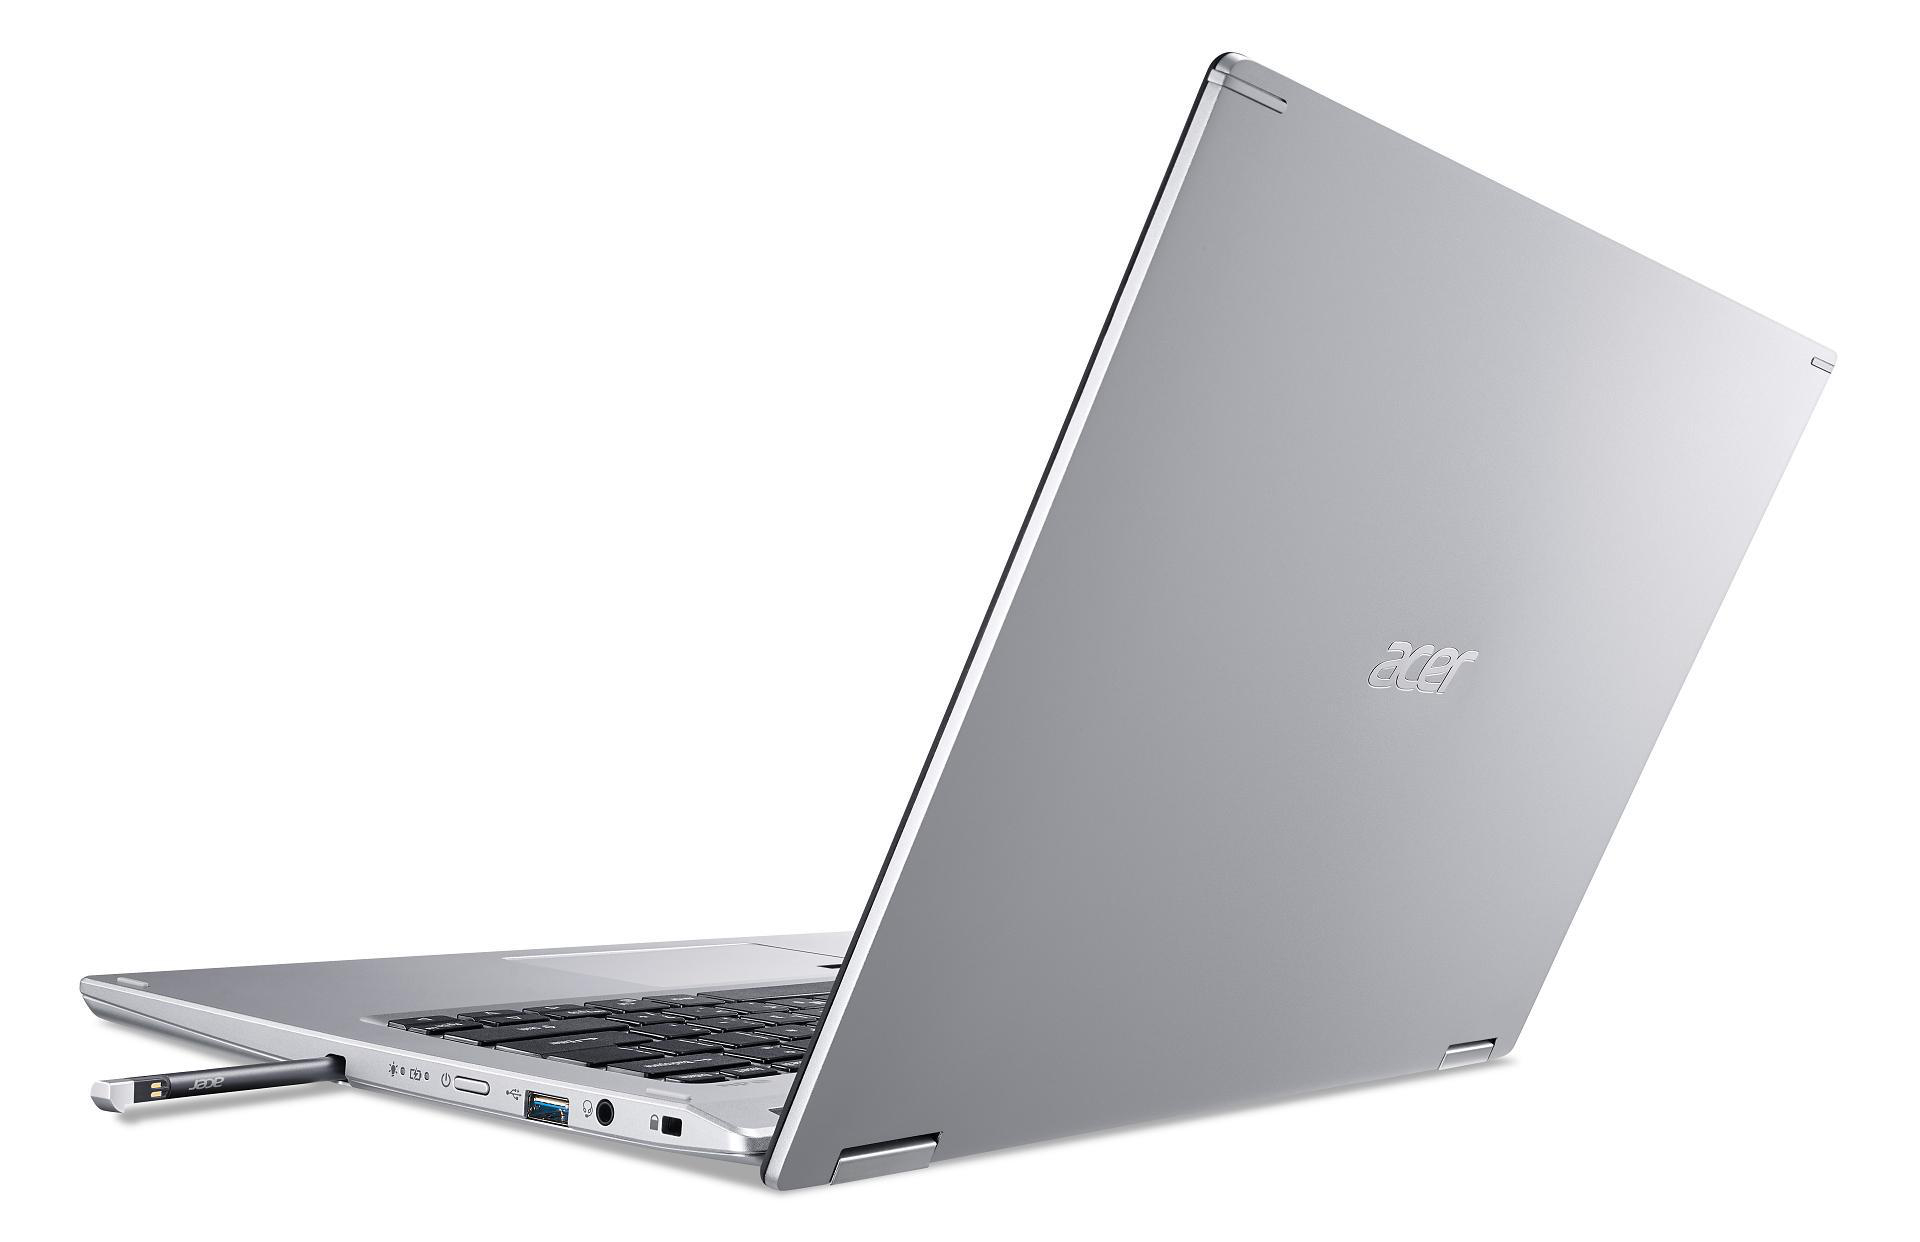 Athlon™ 4 Notebook, AMD, (SP314-21N-R686), Bit) Home Radeon™ mit Graphics, Prozessor, AMD (64 GB Windows SSD, GB Acer Touchscreen, Zoll 10 Spin Silber 3 Silver ACER 14 128 RAM, S-Modus Onboard Display